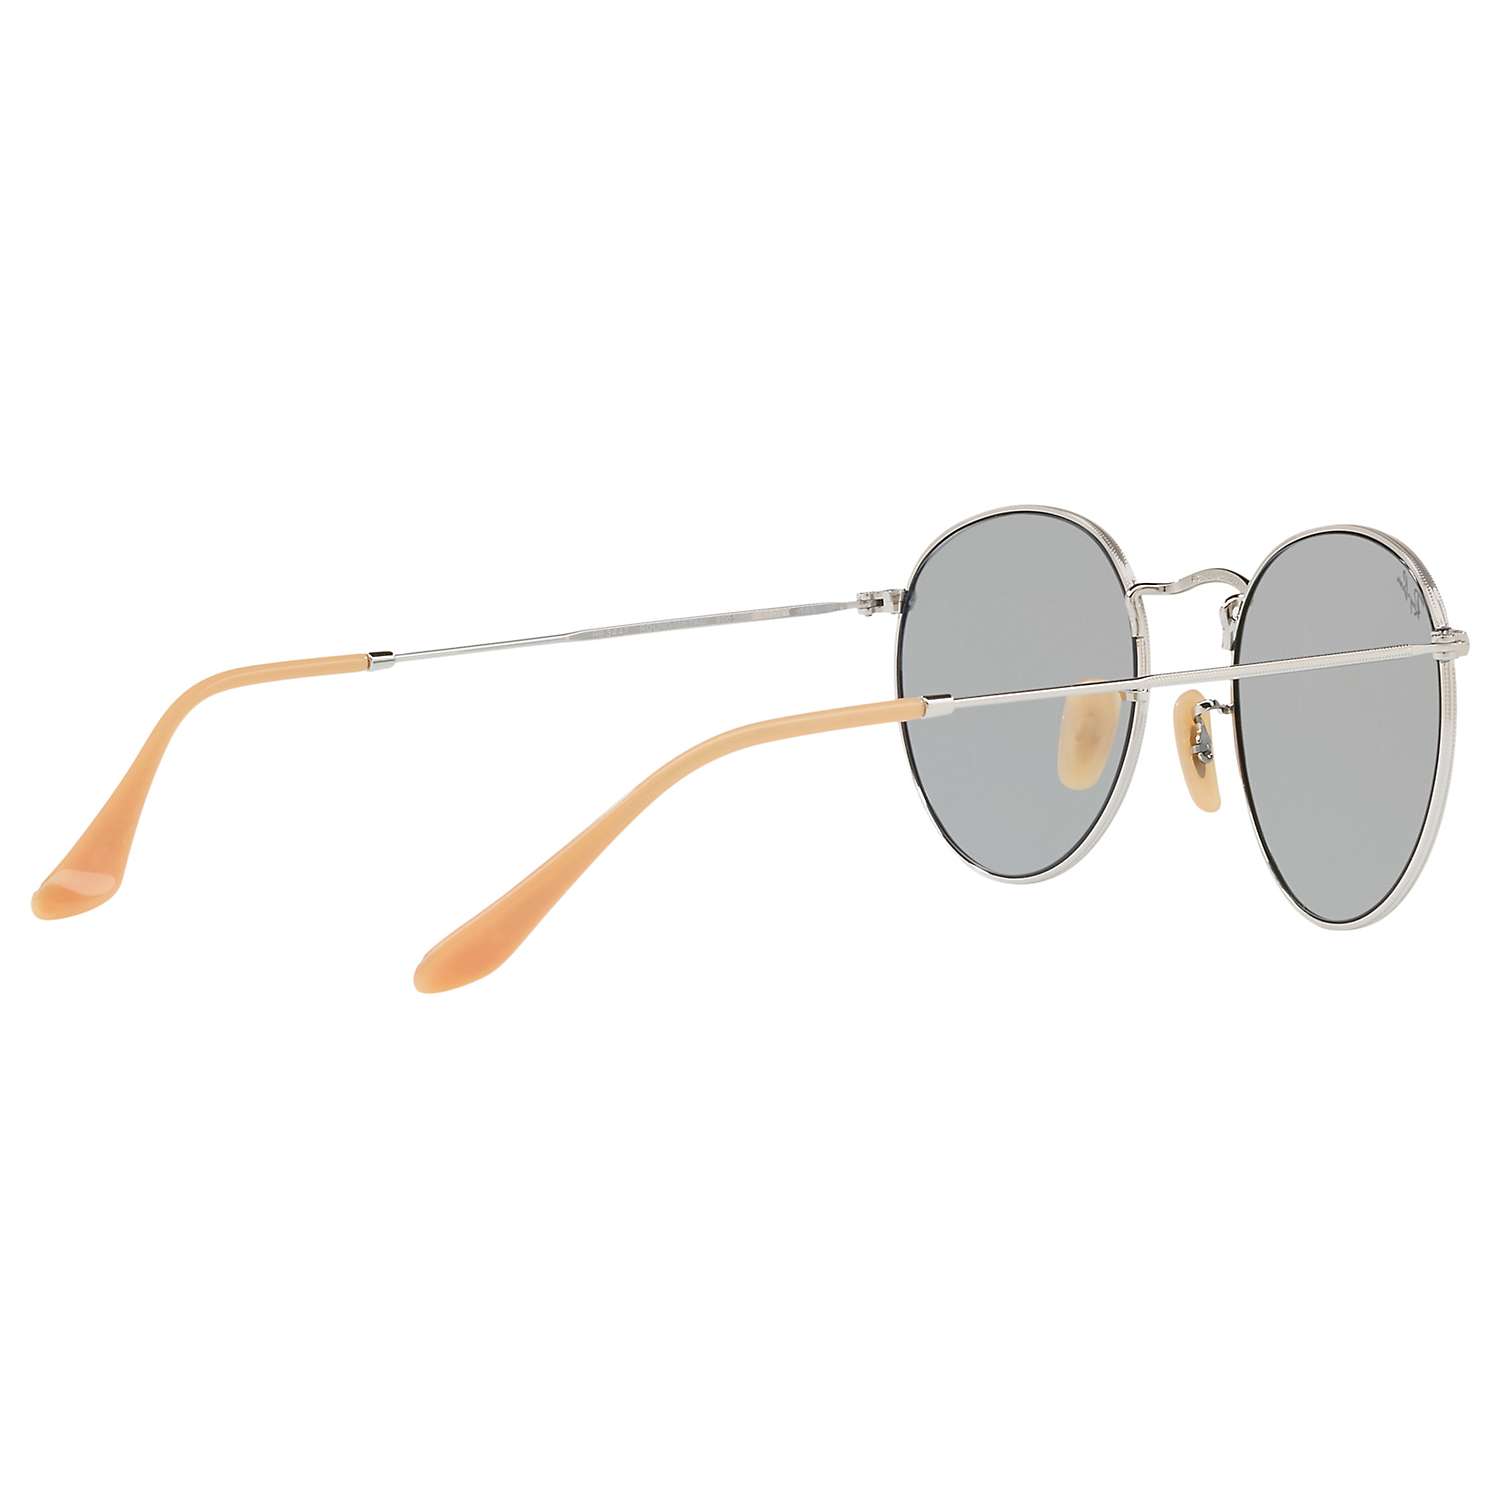 Buy Ray-Ban RB3447 Round Flash Sunglasses Online at johnlewis.com